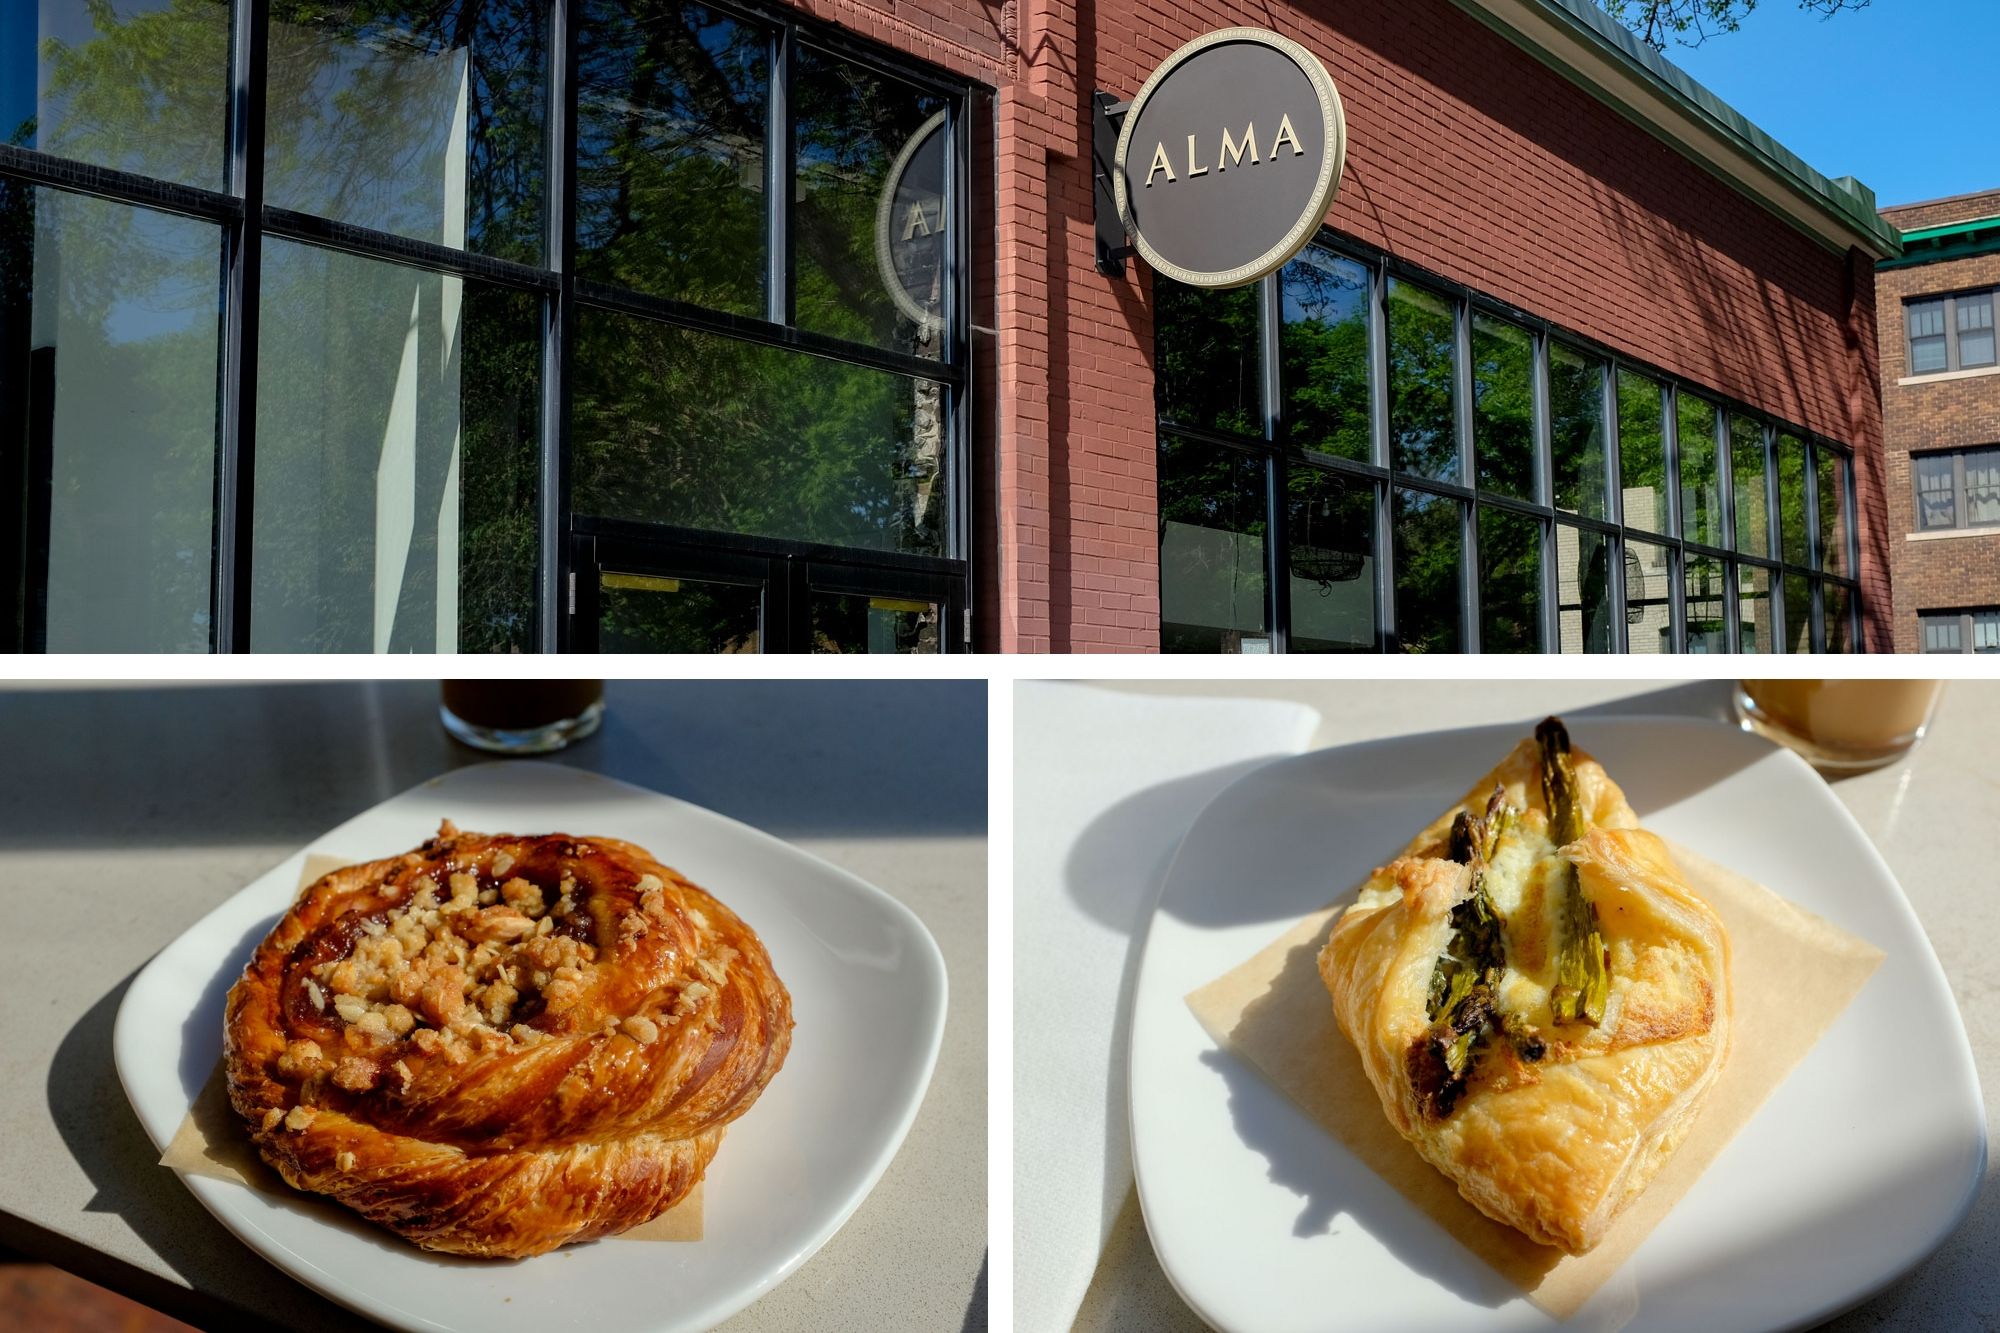 collage: exterior of alma and a danish and asparagus pastry